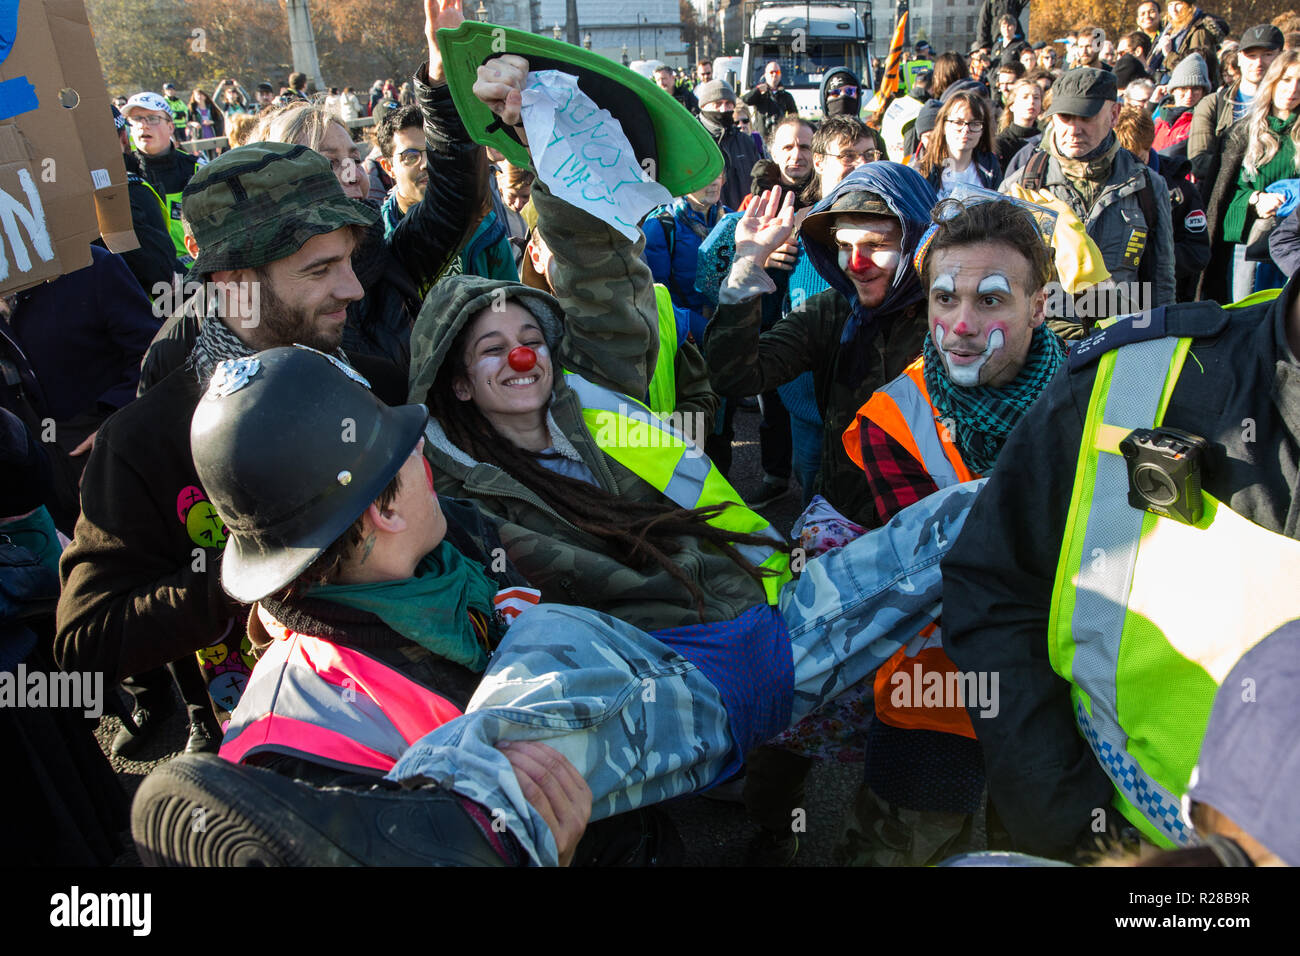 London, UK. 17th November, 2018police officers . Clowns from Clandestine Insurgent Rebel Clown Army (CIRCA) follow police officers arrestingt a man after environmental campaigners from Extinction Rebellion blocked Lambeth Bridge, one of five bridges blocked in central London, as part of a Rebellion Day event to highlight 'criminal inaction in the face of climate change catastrophe and ecological collapse' by the UK Government as part of a programme of civil disobedience during which scores of campaigners have been arrested. Credit: Mark Kerrison/Alamy Live News Stock Photo